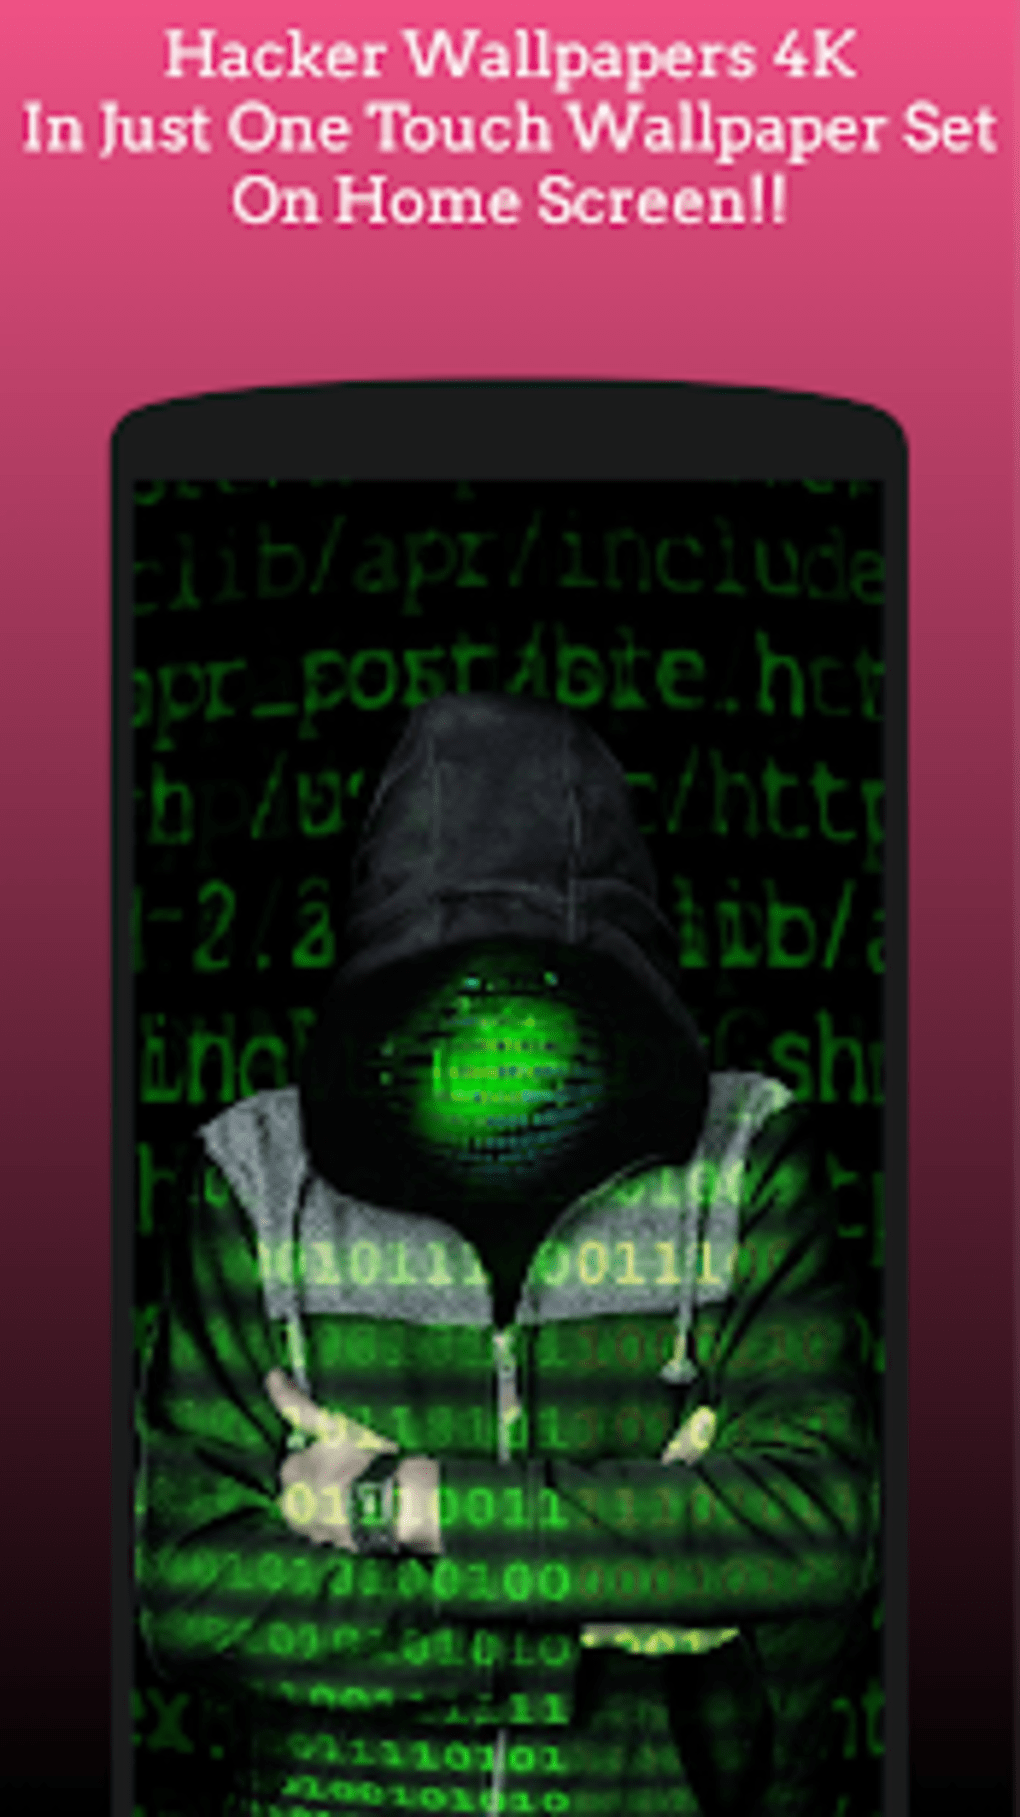 Hacking Wallpaper For Android - HD Wallpaper 